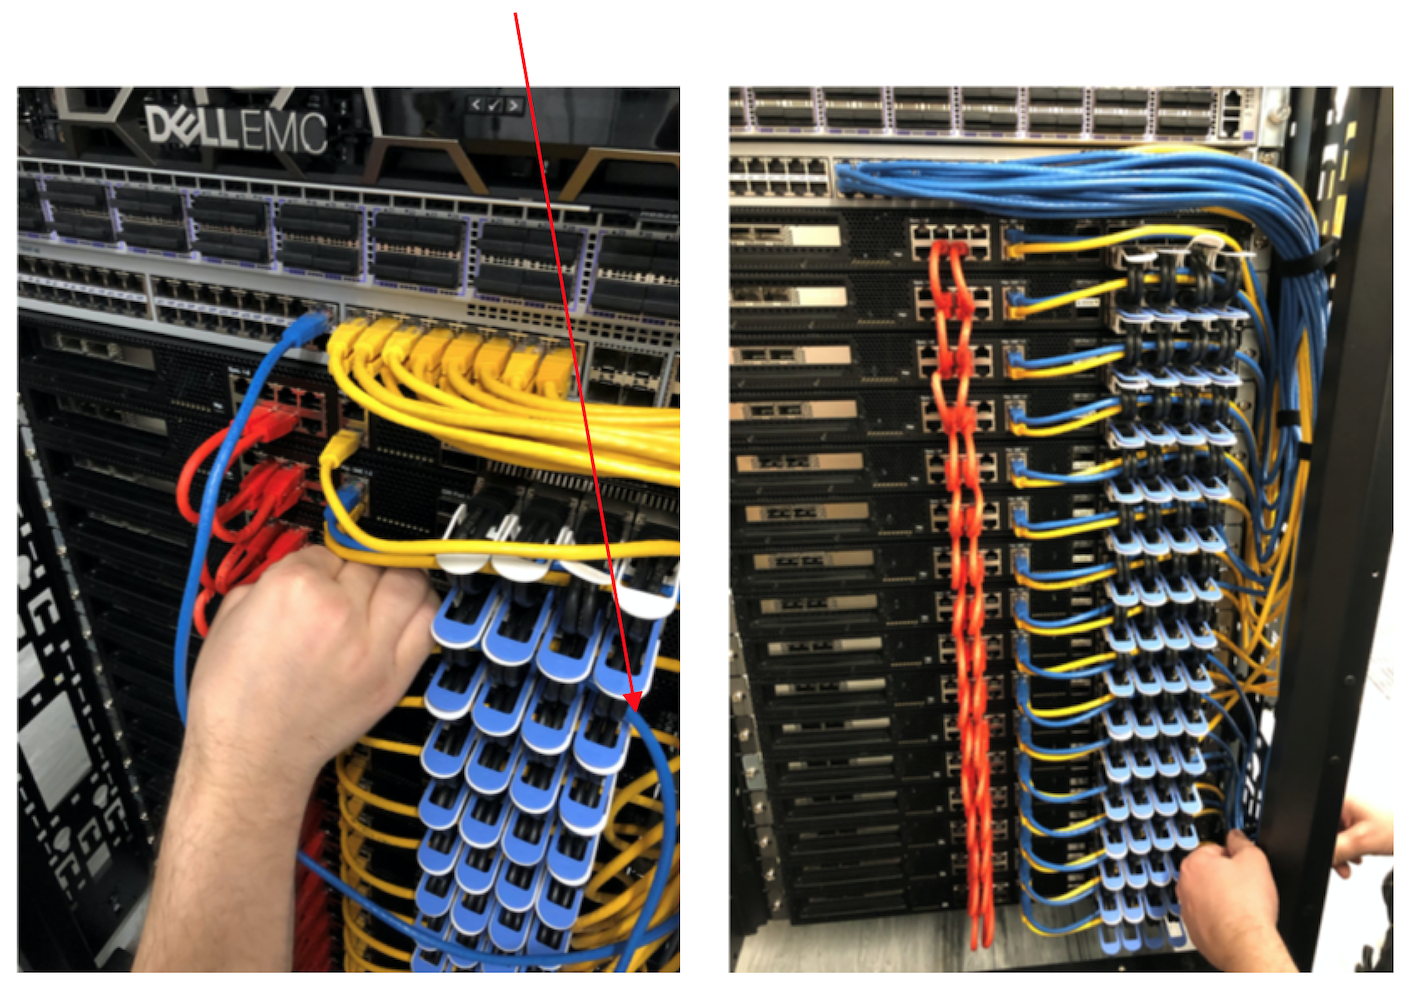 _images/BMC_GW_wiring.png